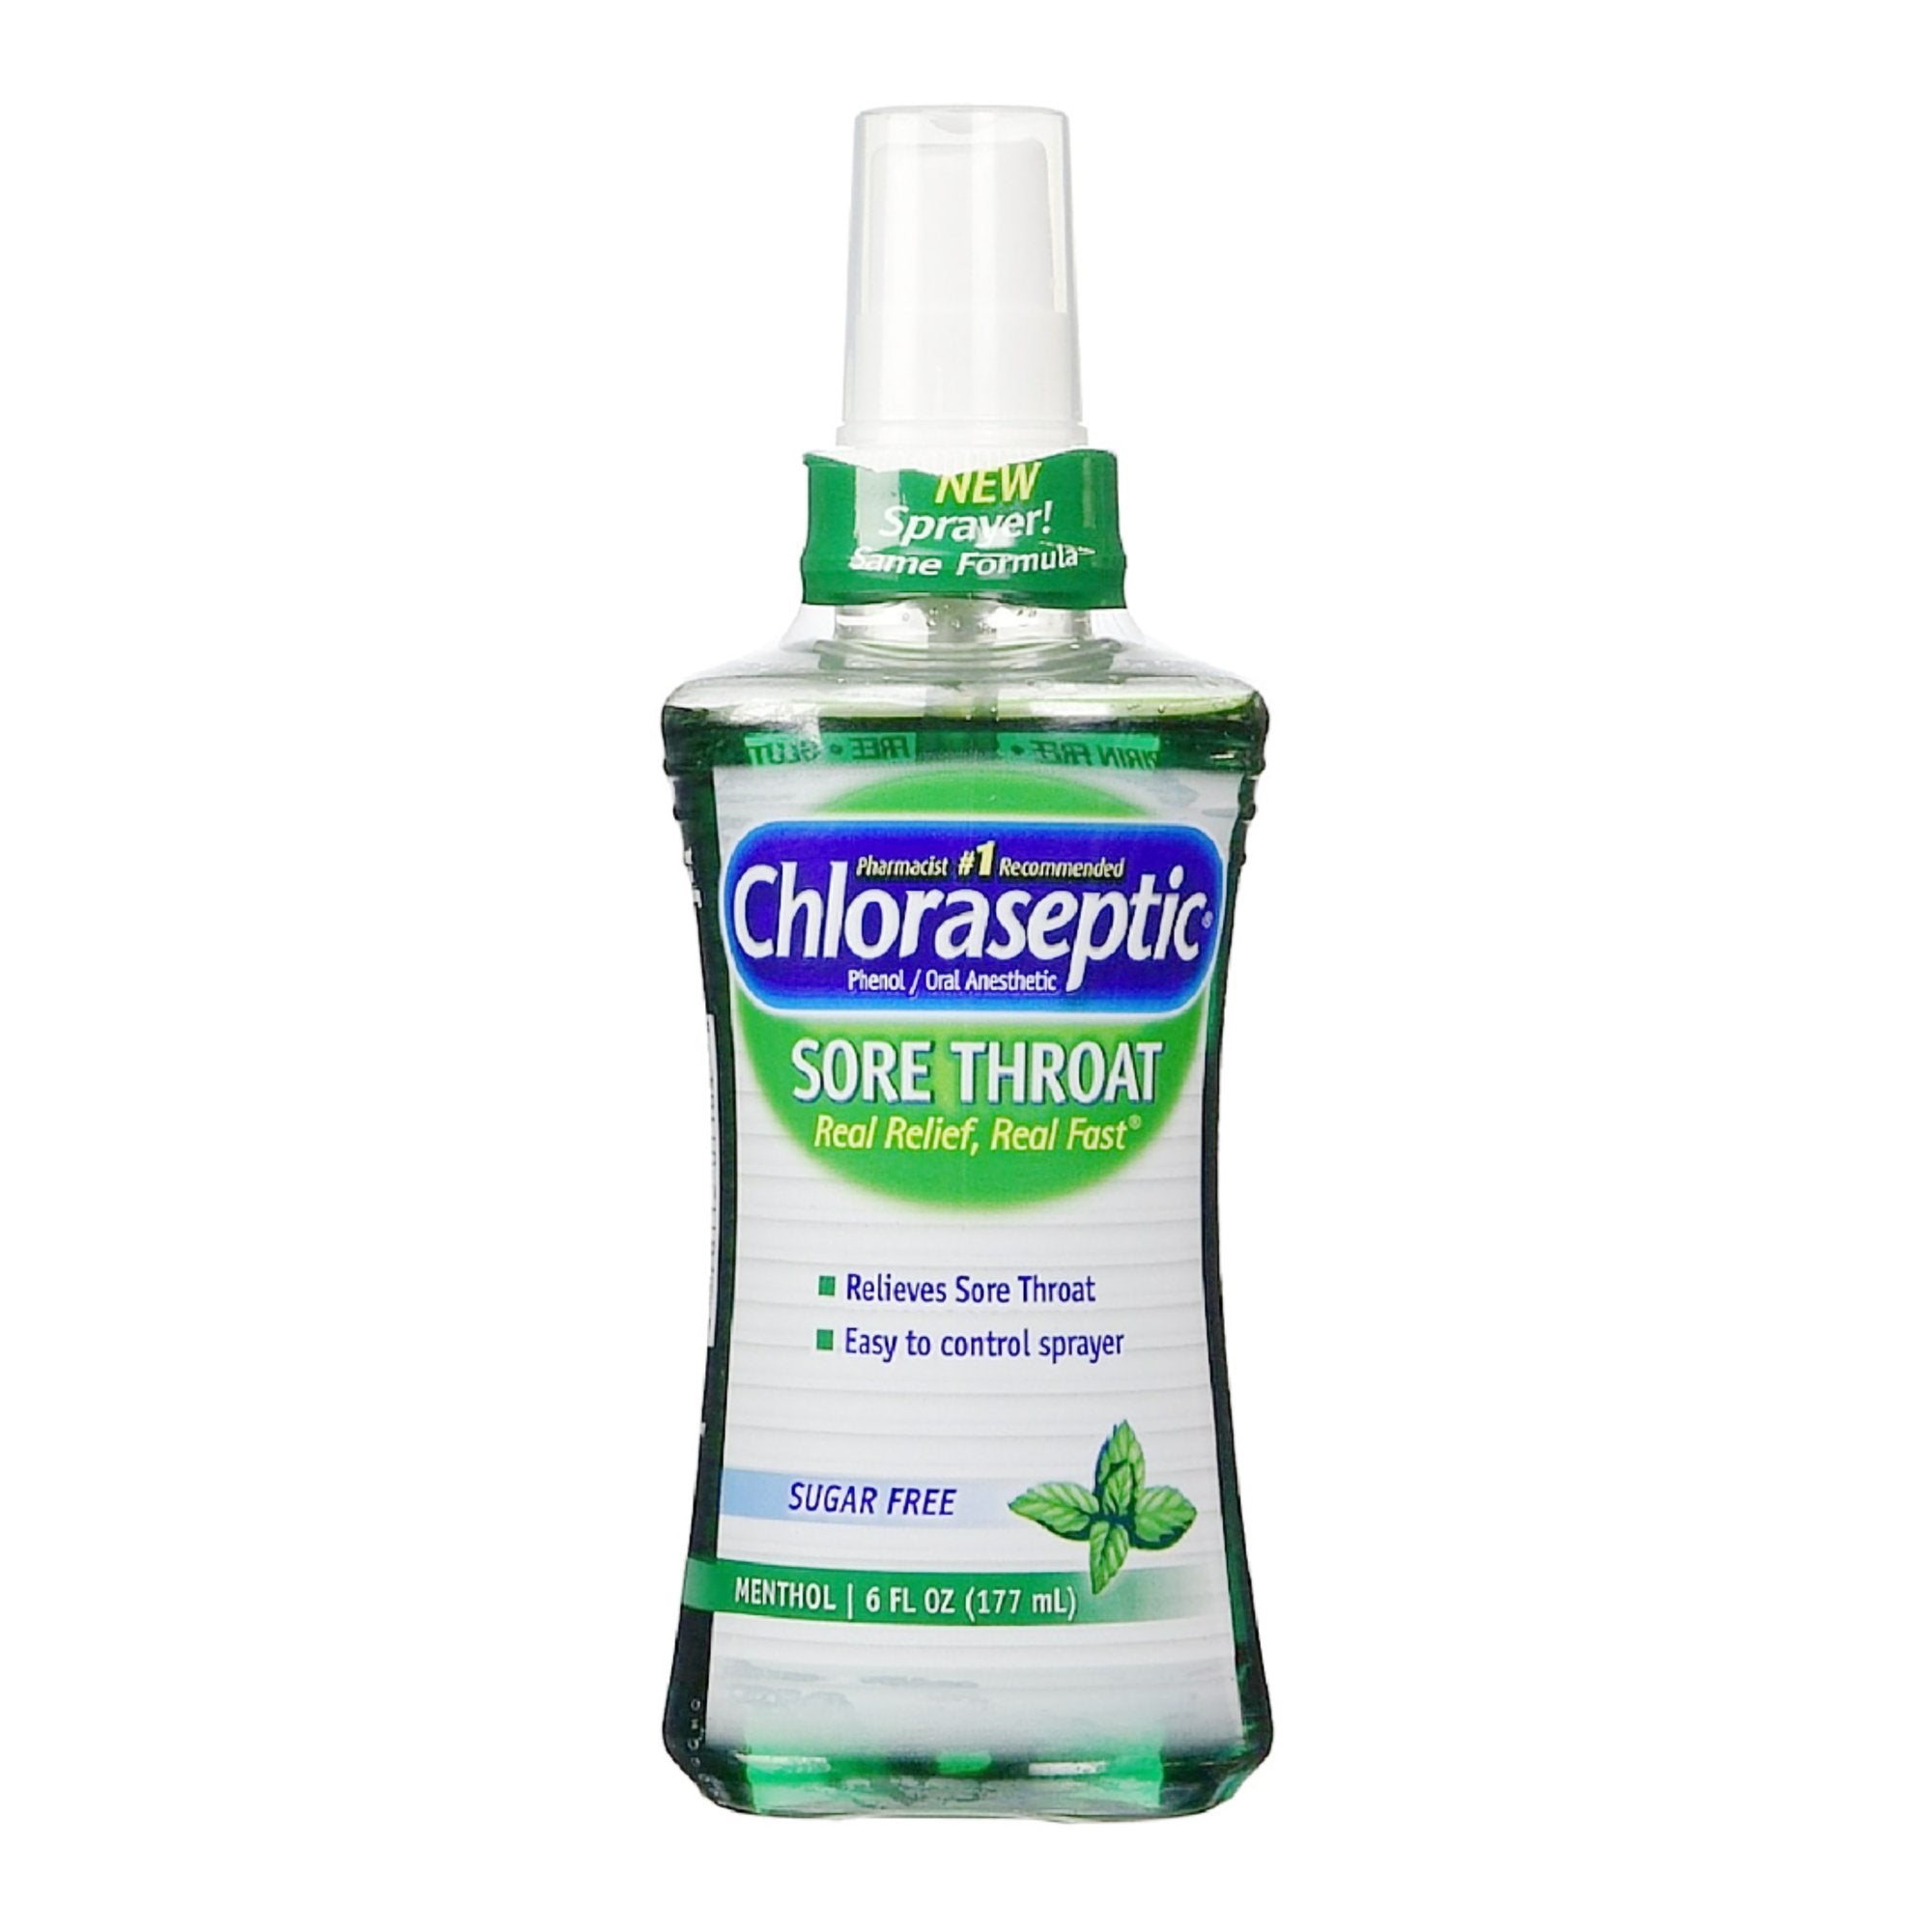 Sore Throat Relief Chloraseptic® 1.4% Strength Oral Spray 6 oz.